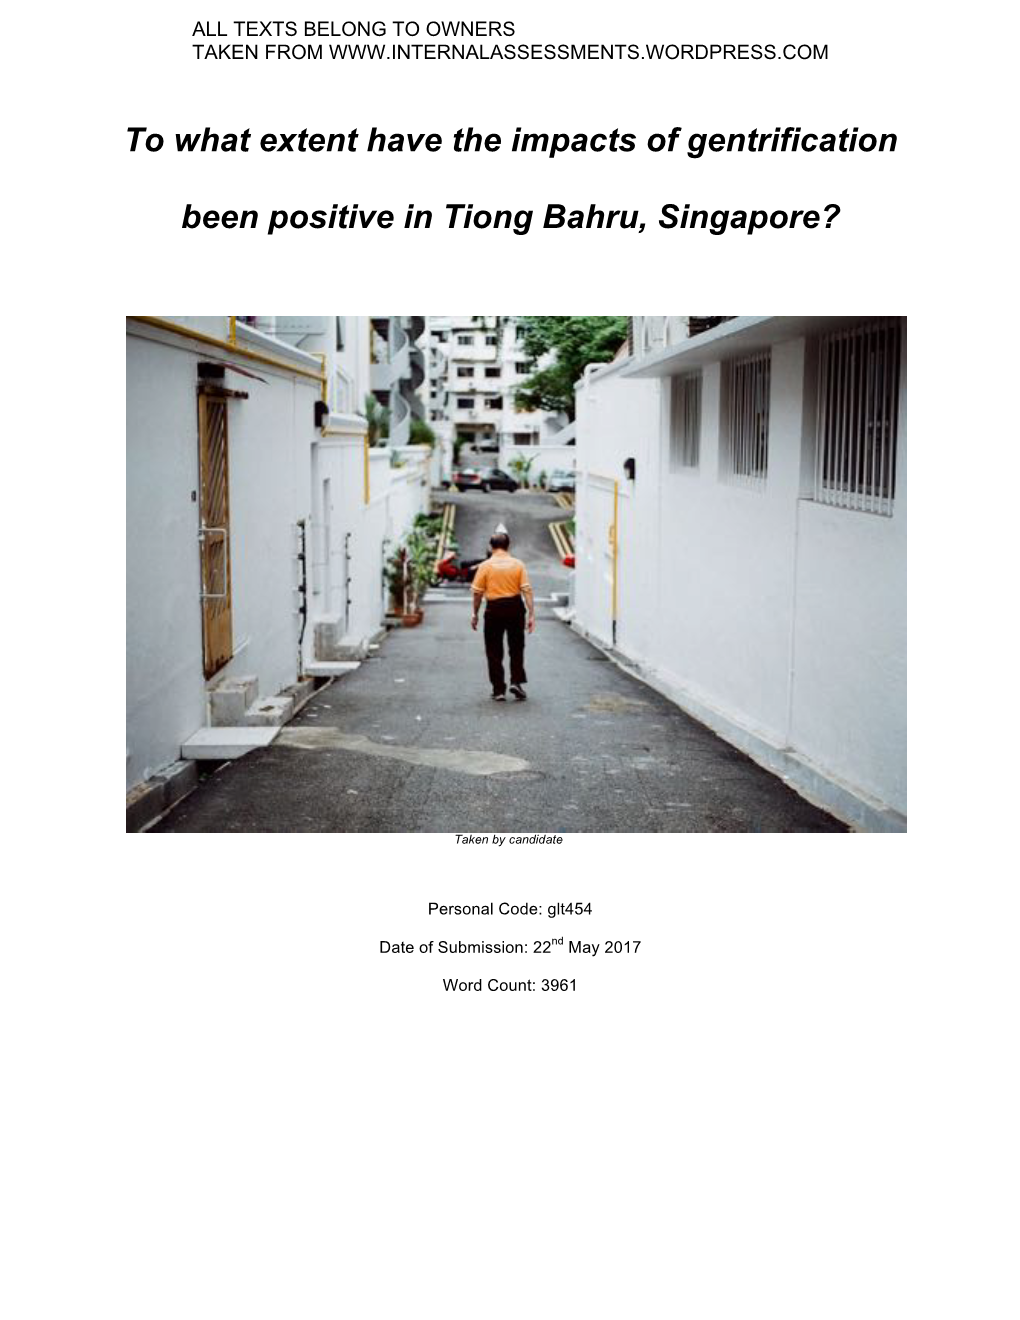 To What Extent Have the Impacts of Gentrification Been Positive in Tiong Bahru, Singapore?